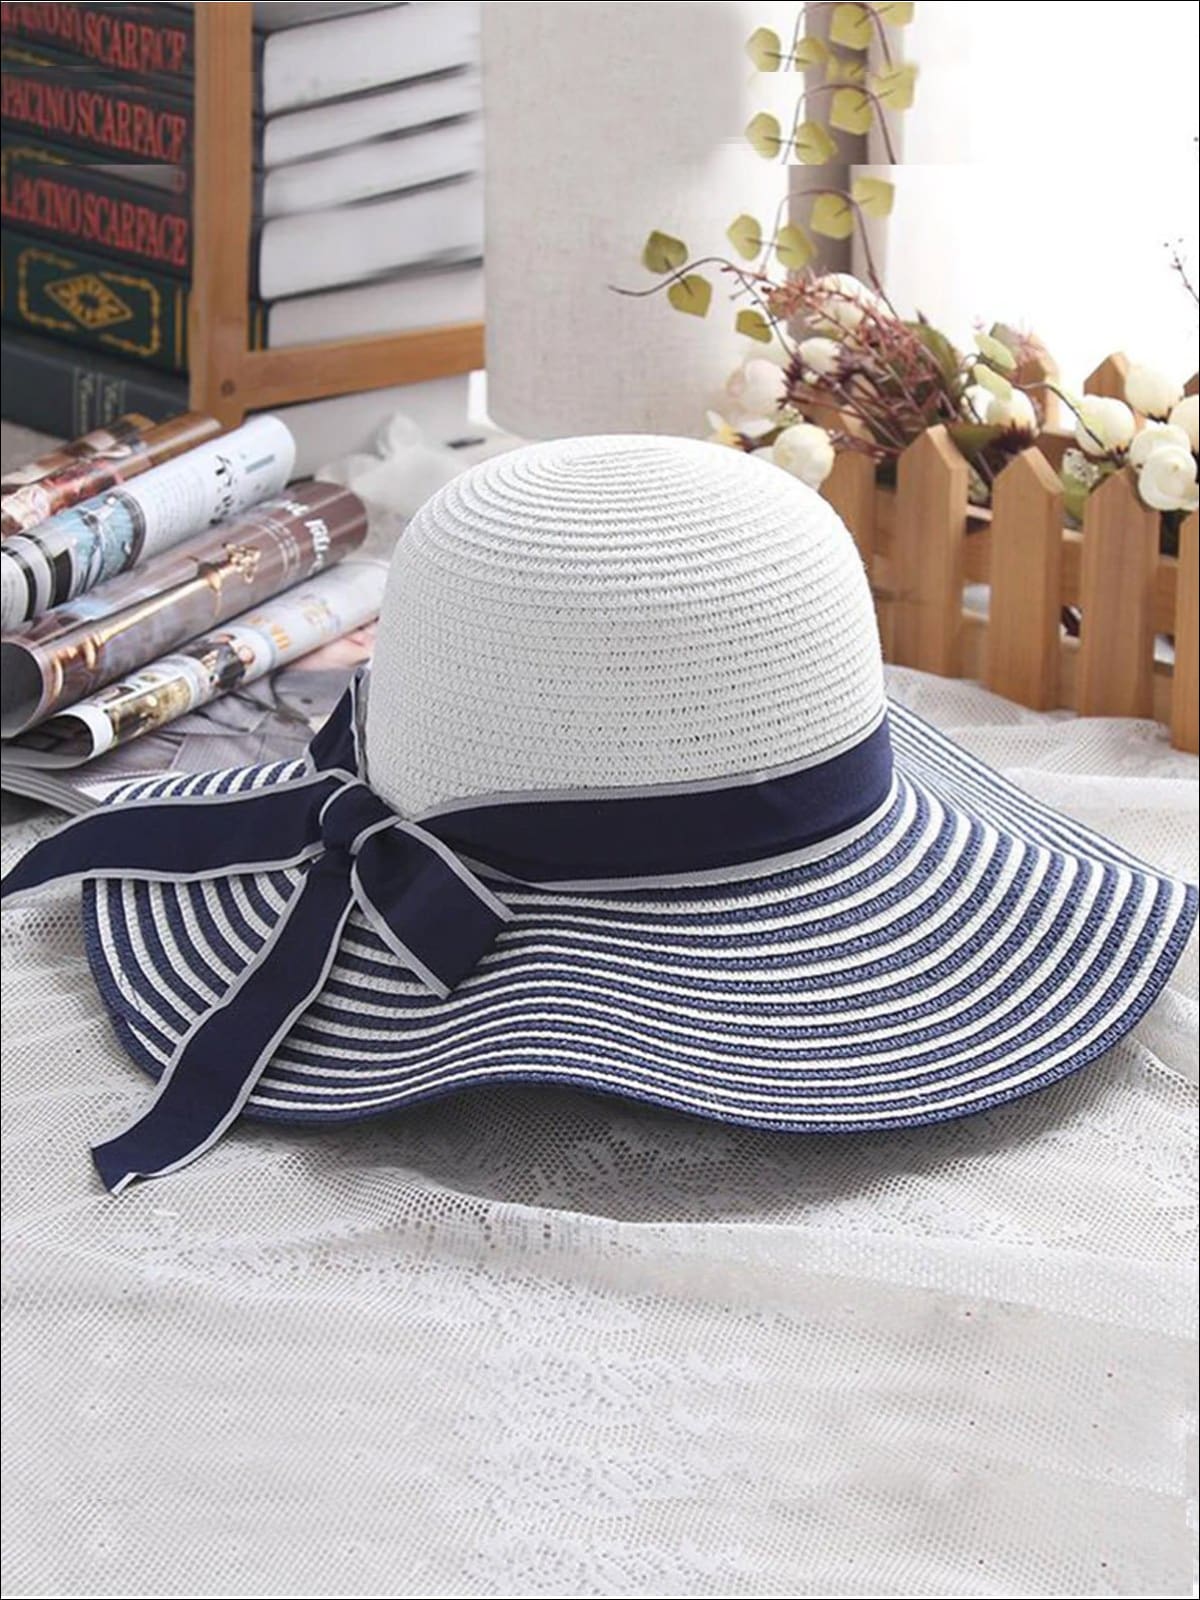 https://cdn.shopify.com/s/files/1/0996/1812/products/womens-vintage-striped-wide-brim-summer-hat-blue-about-56-58cm-20-39-99-40-59-6x6y-afterchristmas-bfcutoff-accessories-mia-belle-overseas-fulfillment-baby_224.jpg?v=1577228602